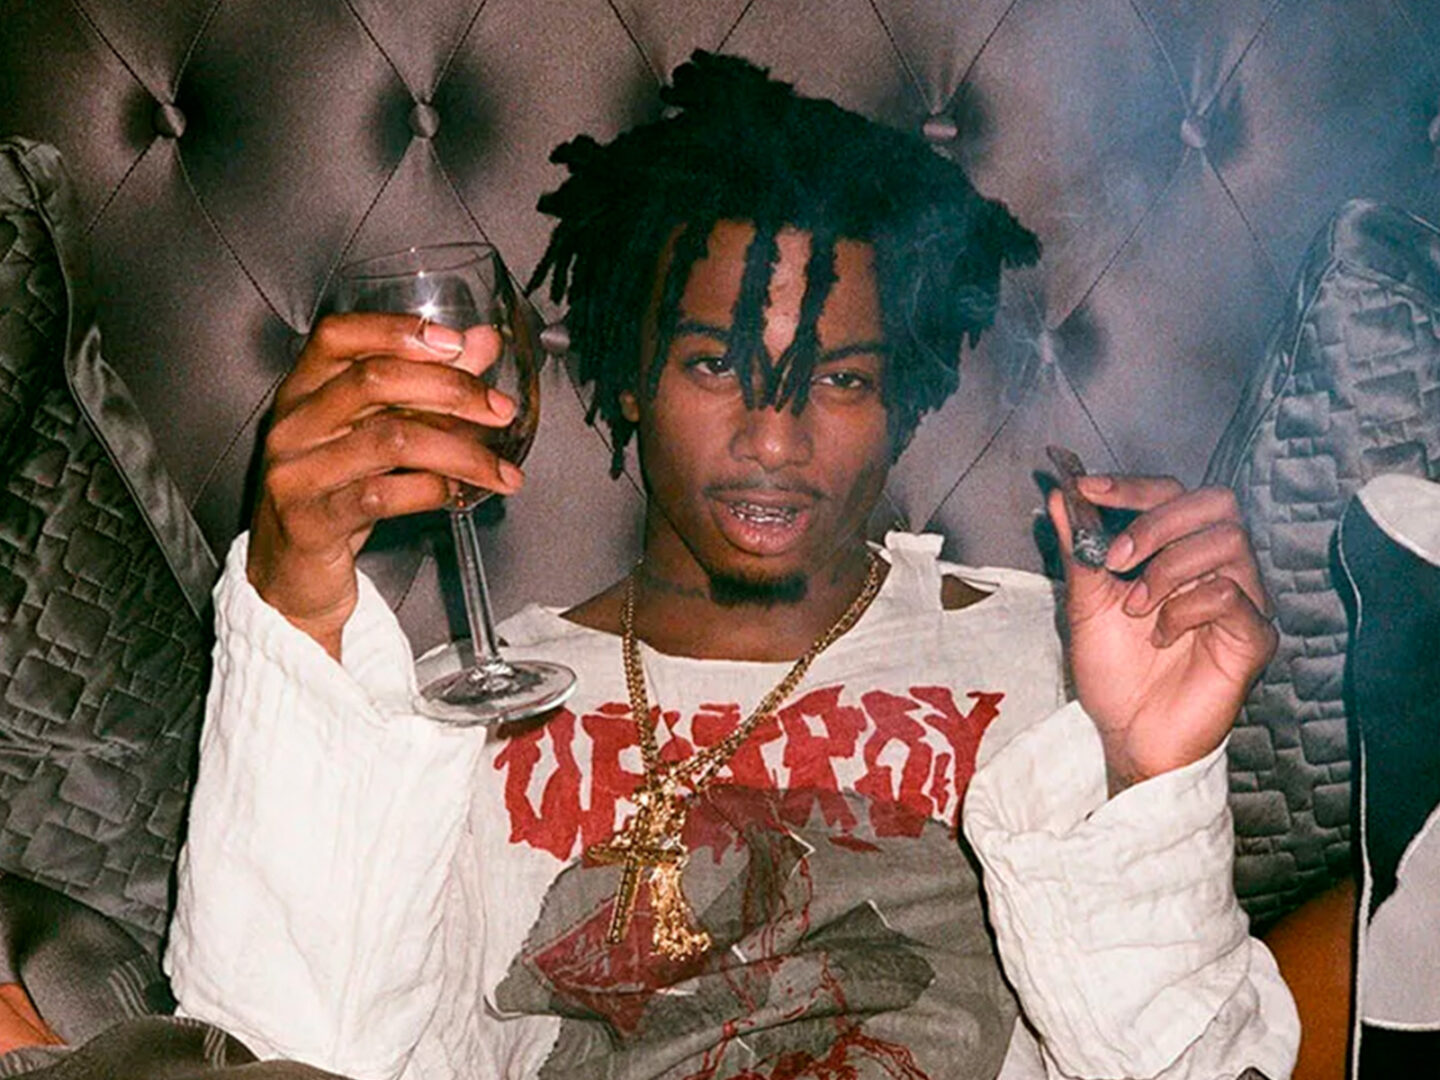 Playboi Carti releases a preview of his new track ‘EvilJ0rdan’